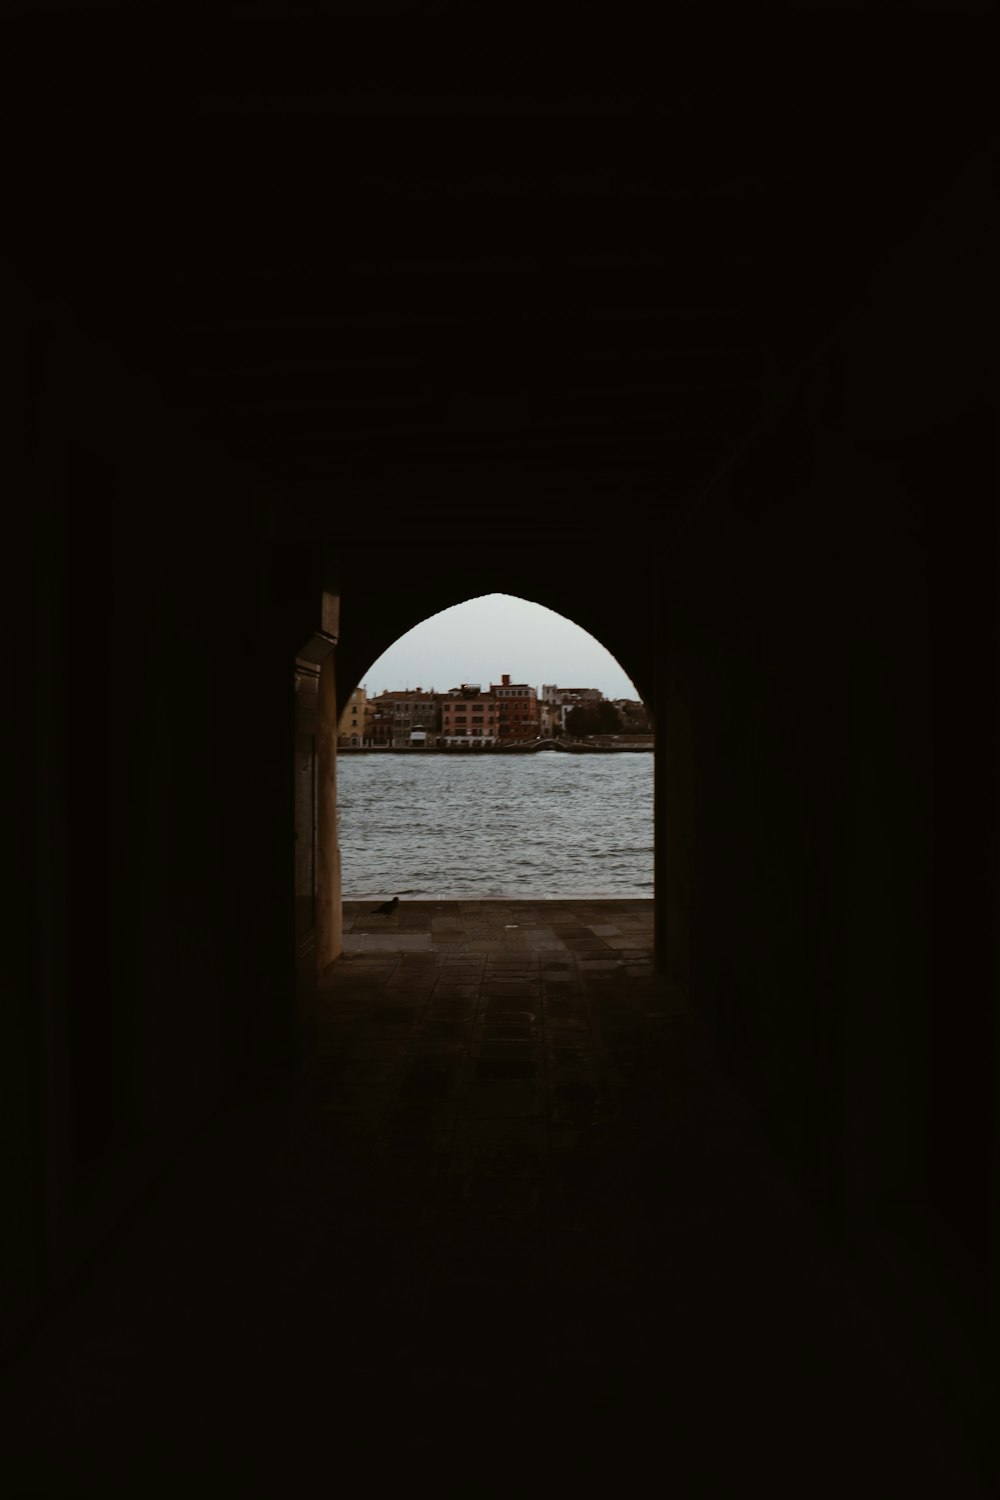 brown concrete arch near body of water during daytime